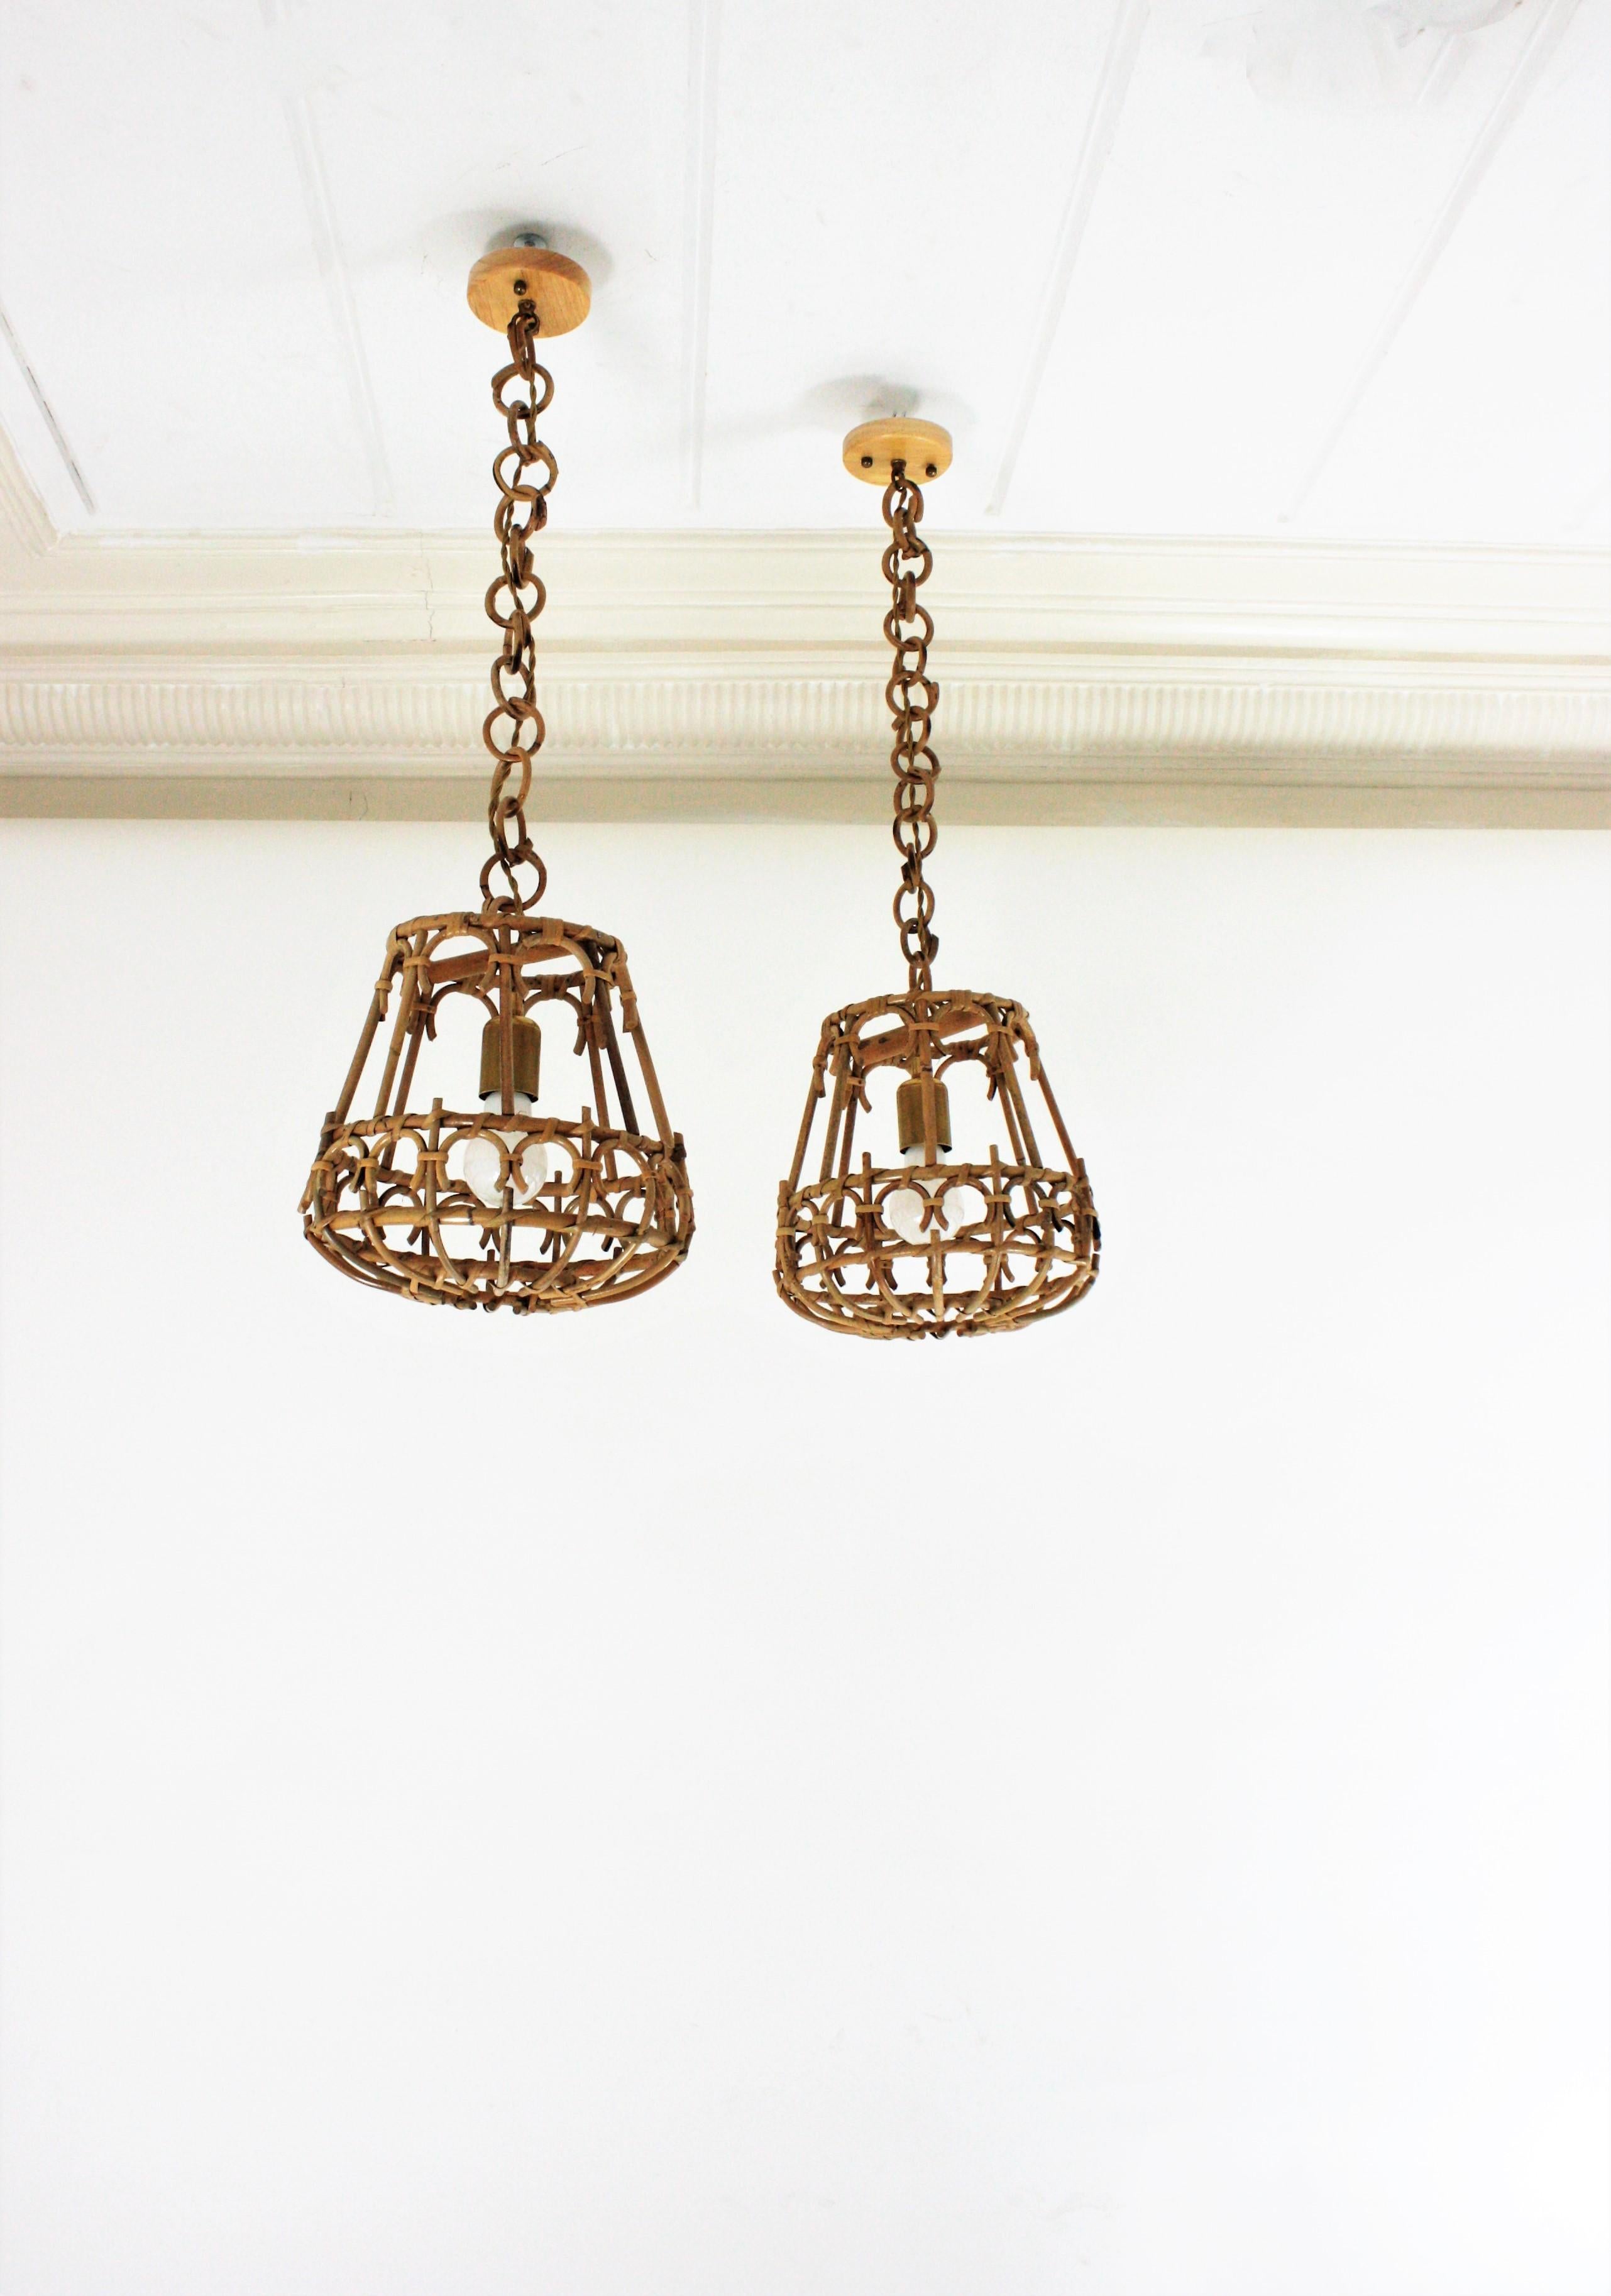  Pair of Rattan Pendant Lights or Lanterns, 1960s For Sale 11